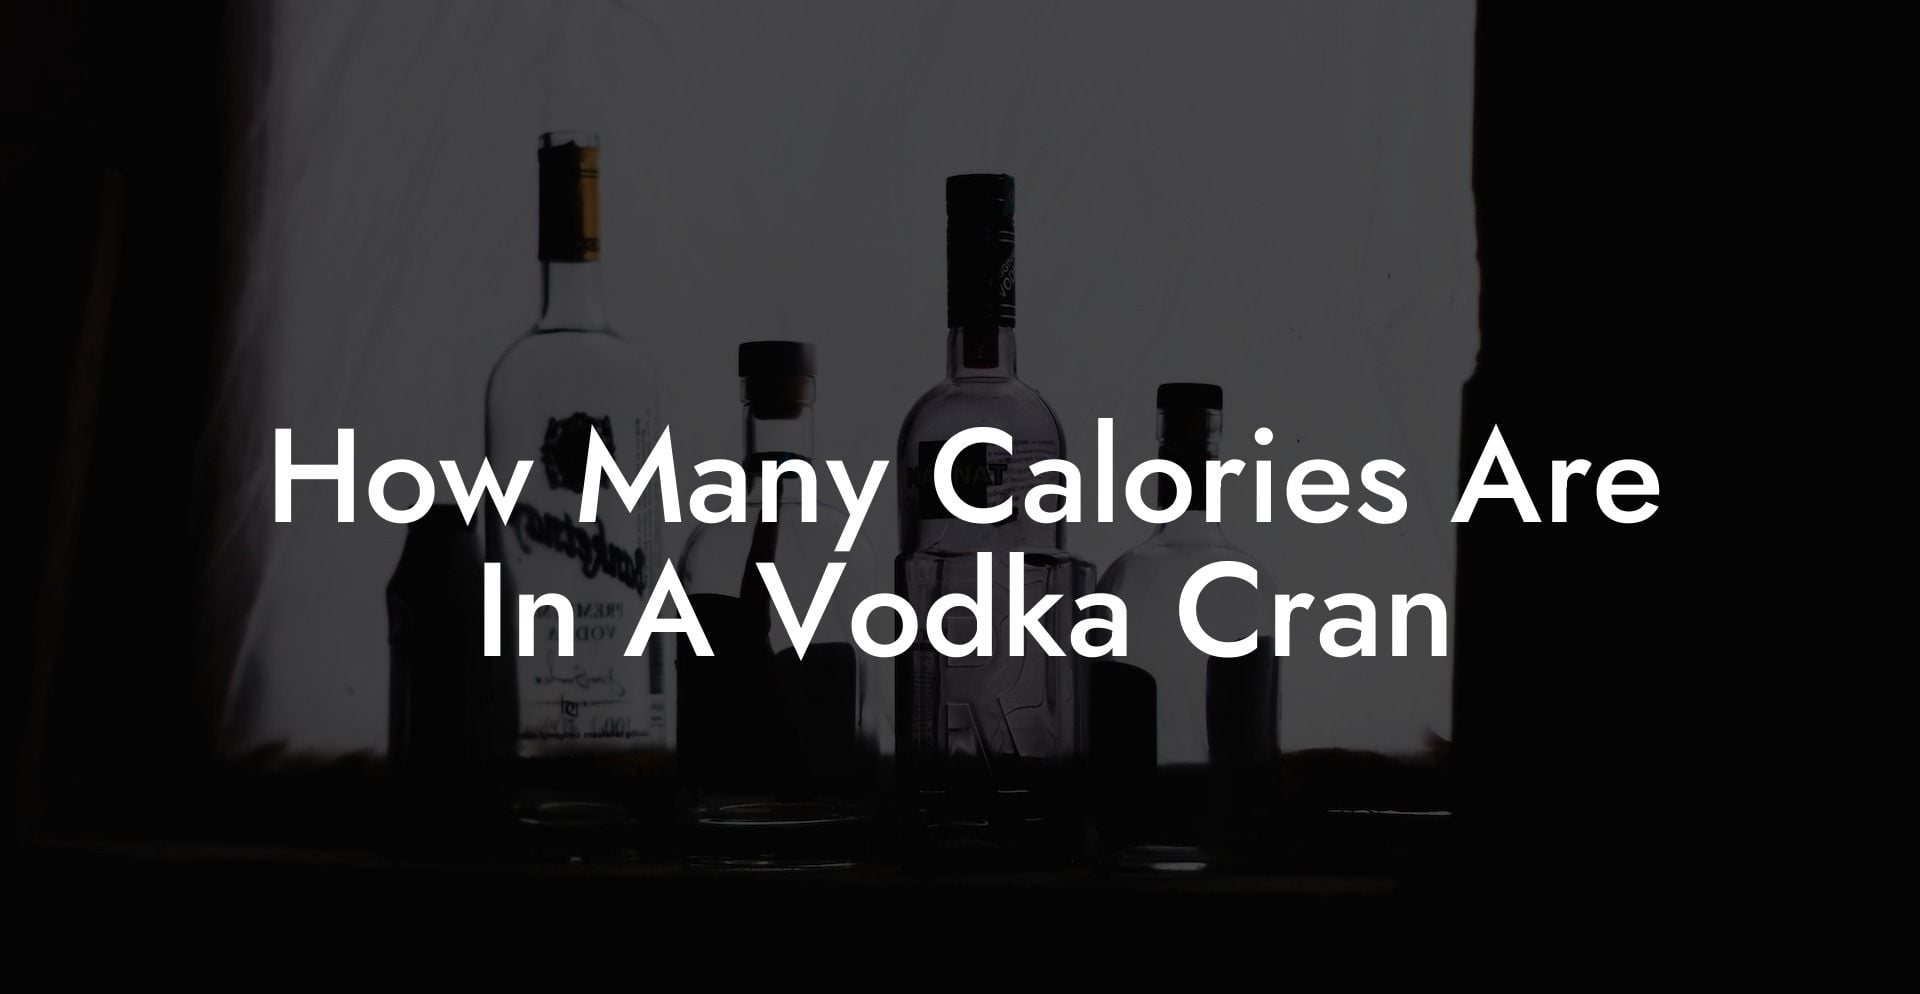 How Many Calories Are In A Vodka Cran